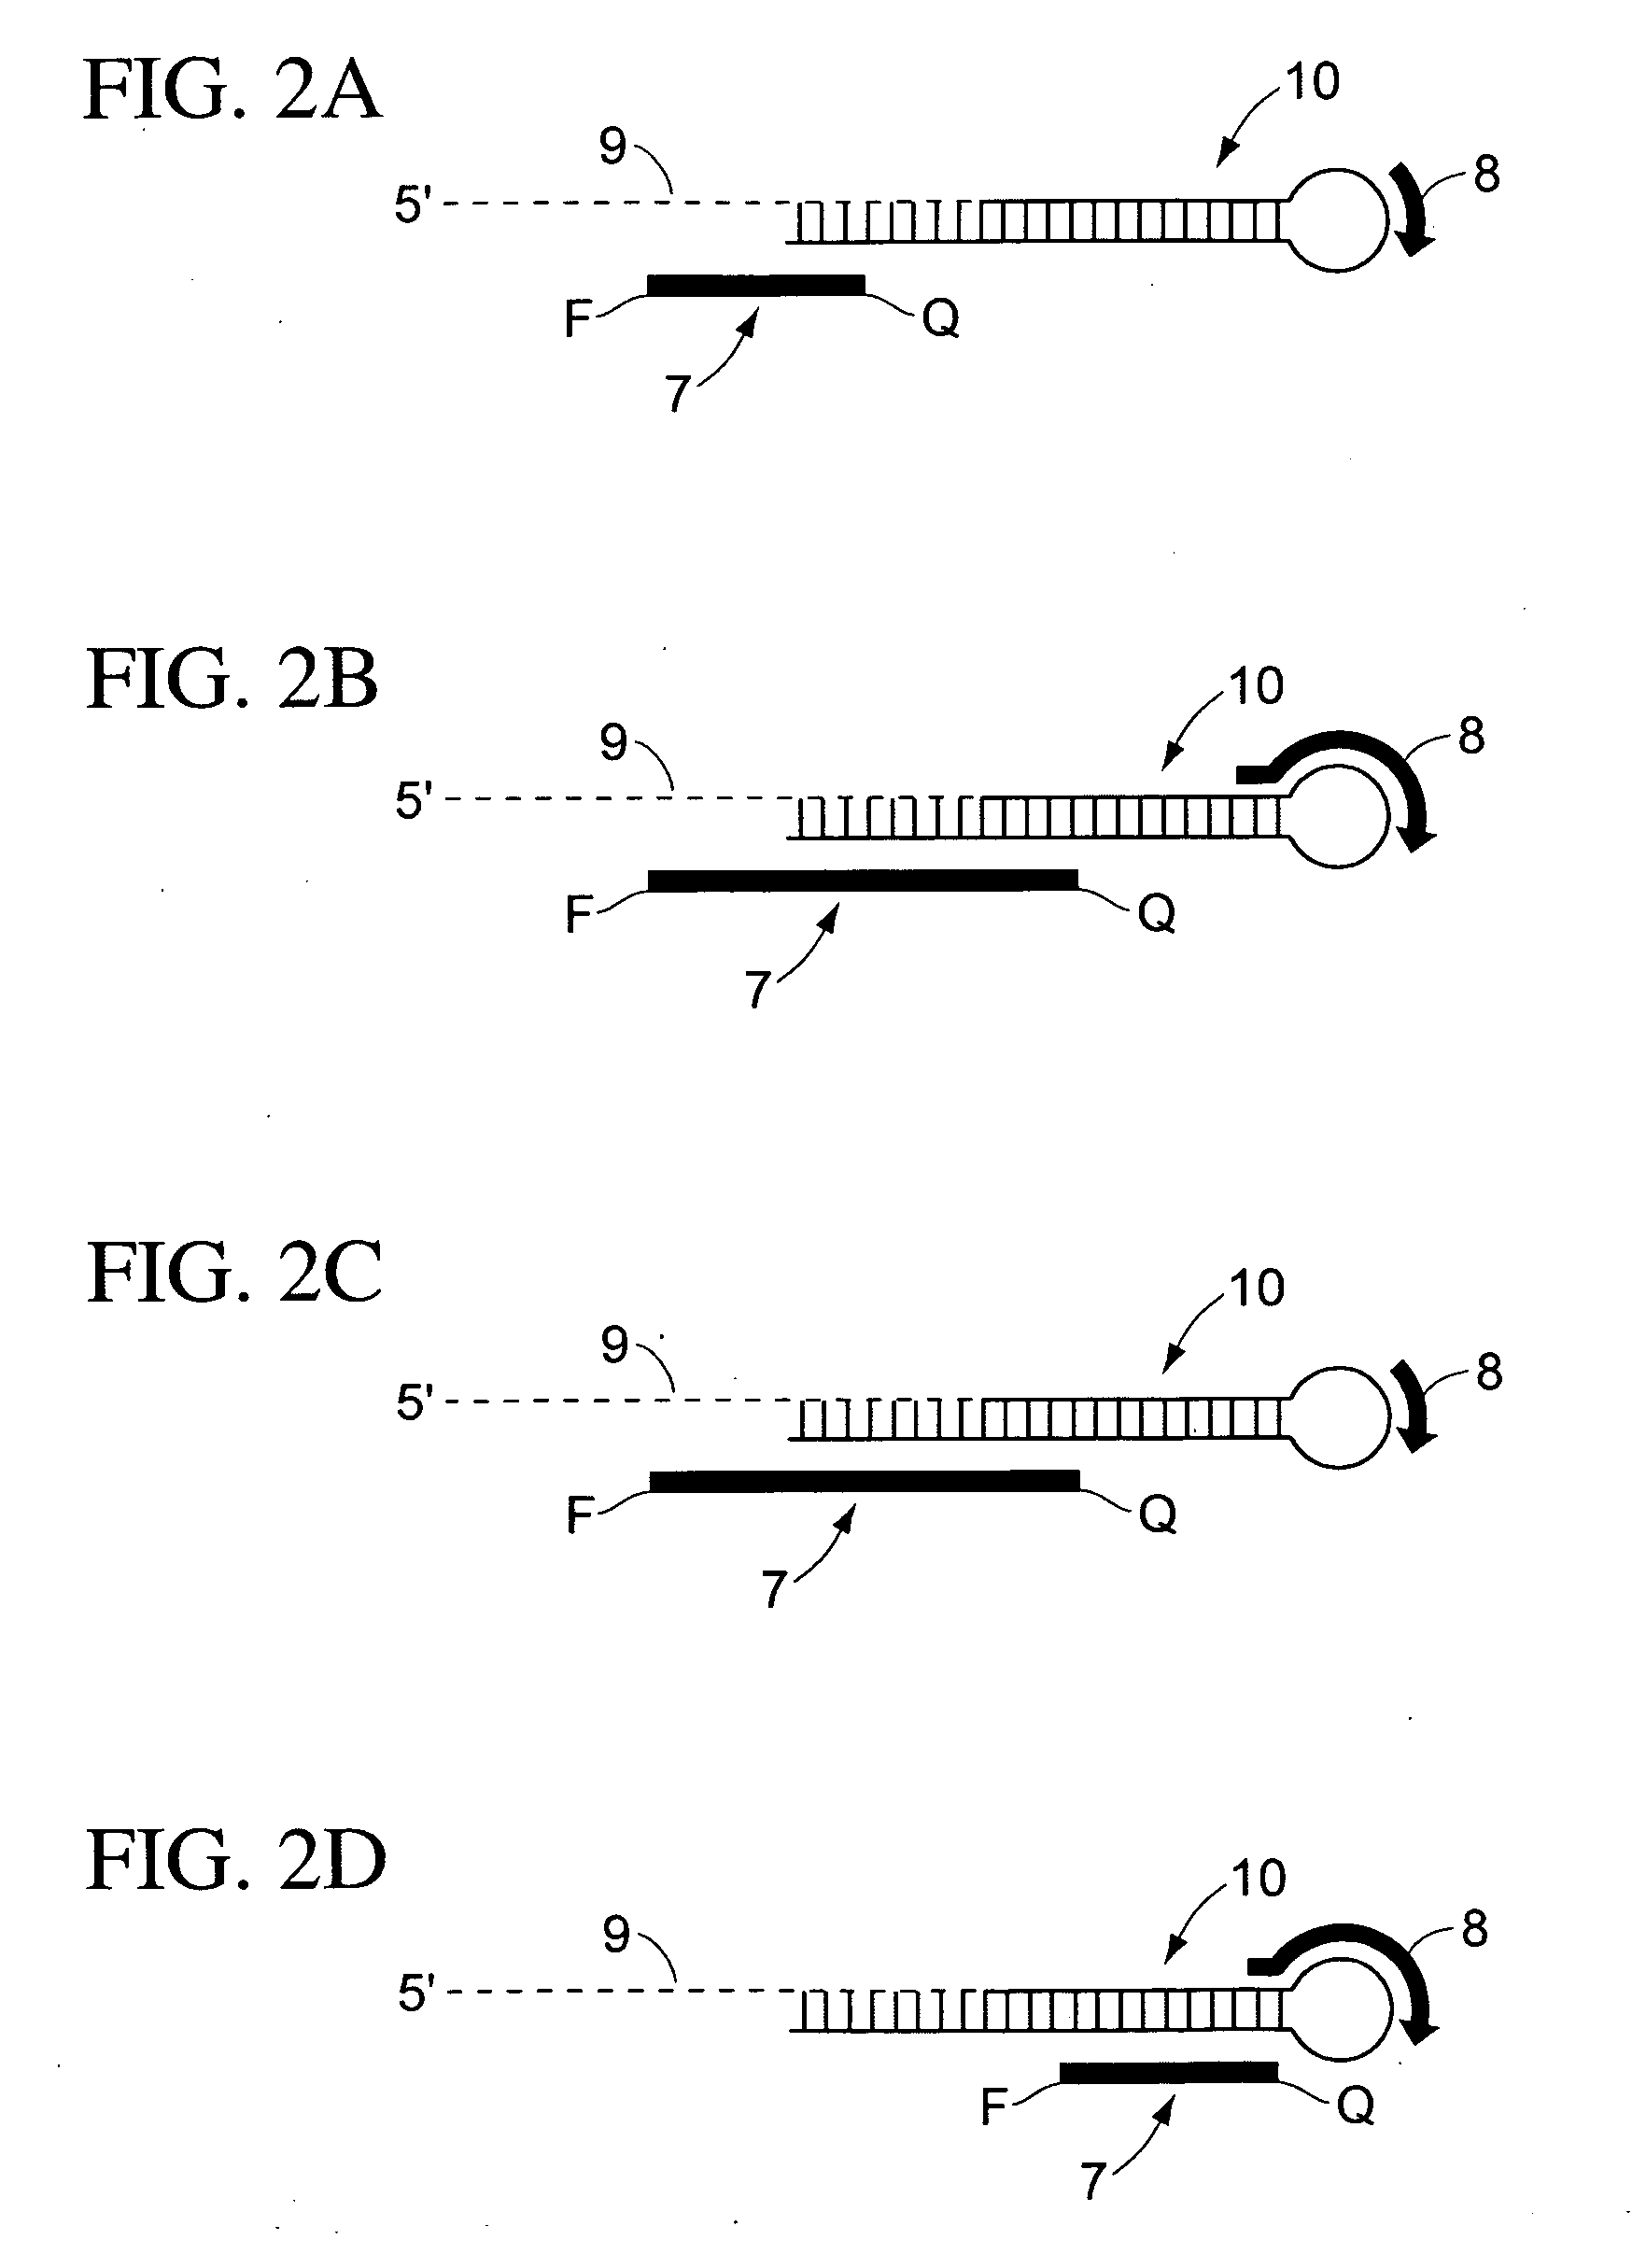 Methods for characterizing cells using amplified micro rnas